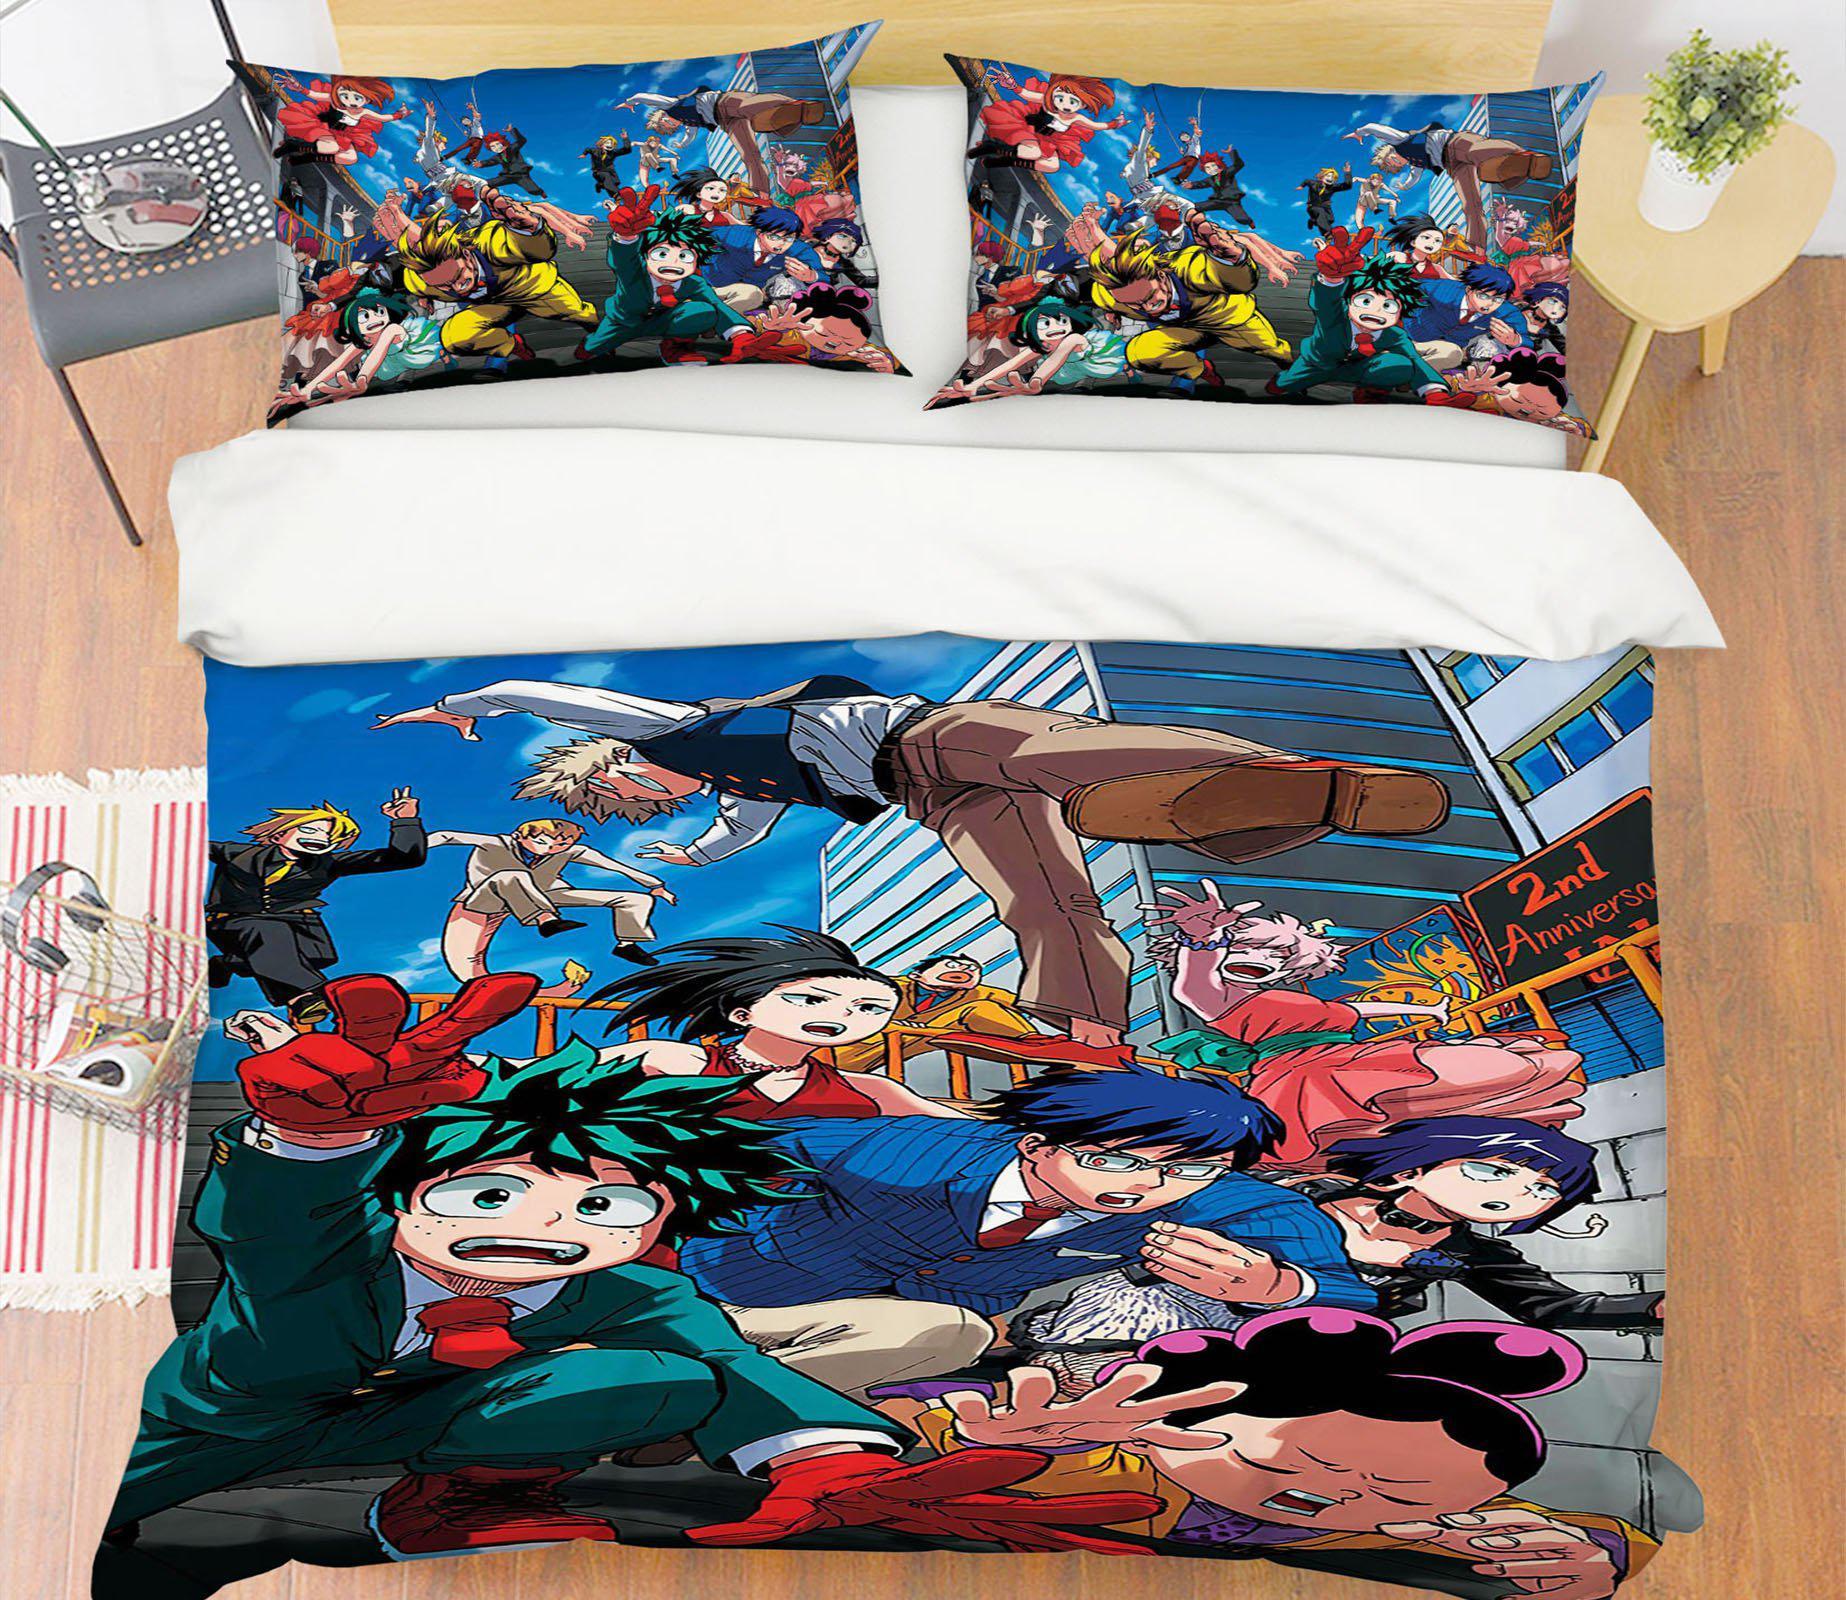 3D Bed Pillowcases Quilt My Hero Academia 21067 Anime Quilt Cover Set Bedding Set Pillowcases 3D Bed Pillowcases Quilt Duvet cover